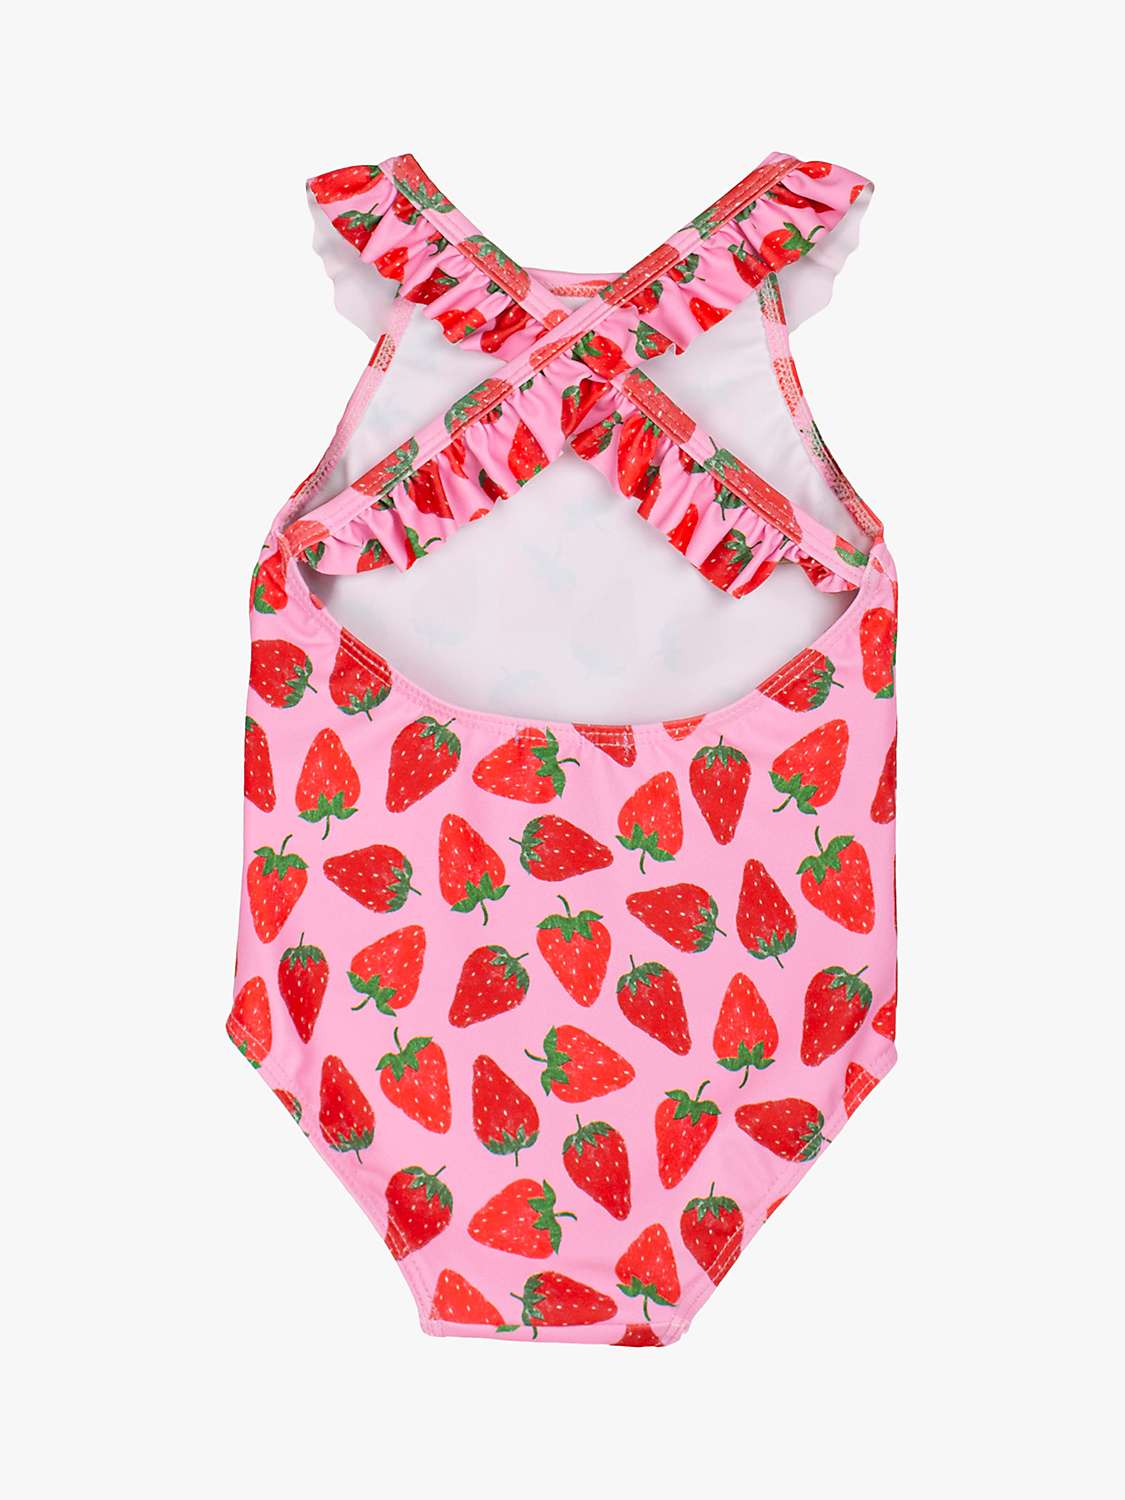 Buy Trotters Baby Strawberry Print Frill Swimsuit, Pink/Strawberry Online at johnlewis.com